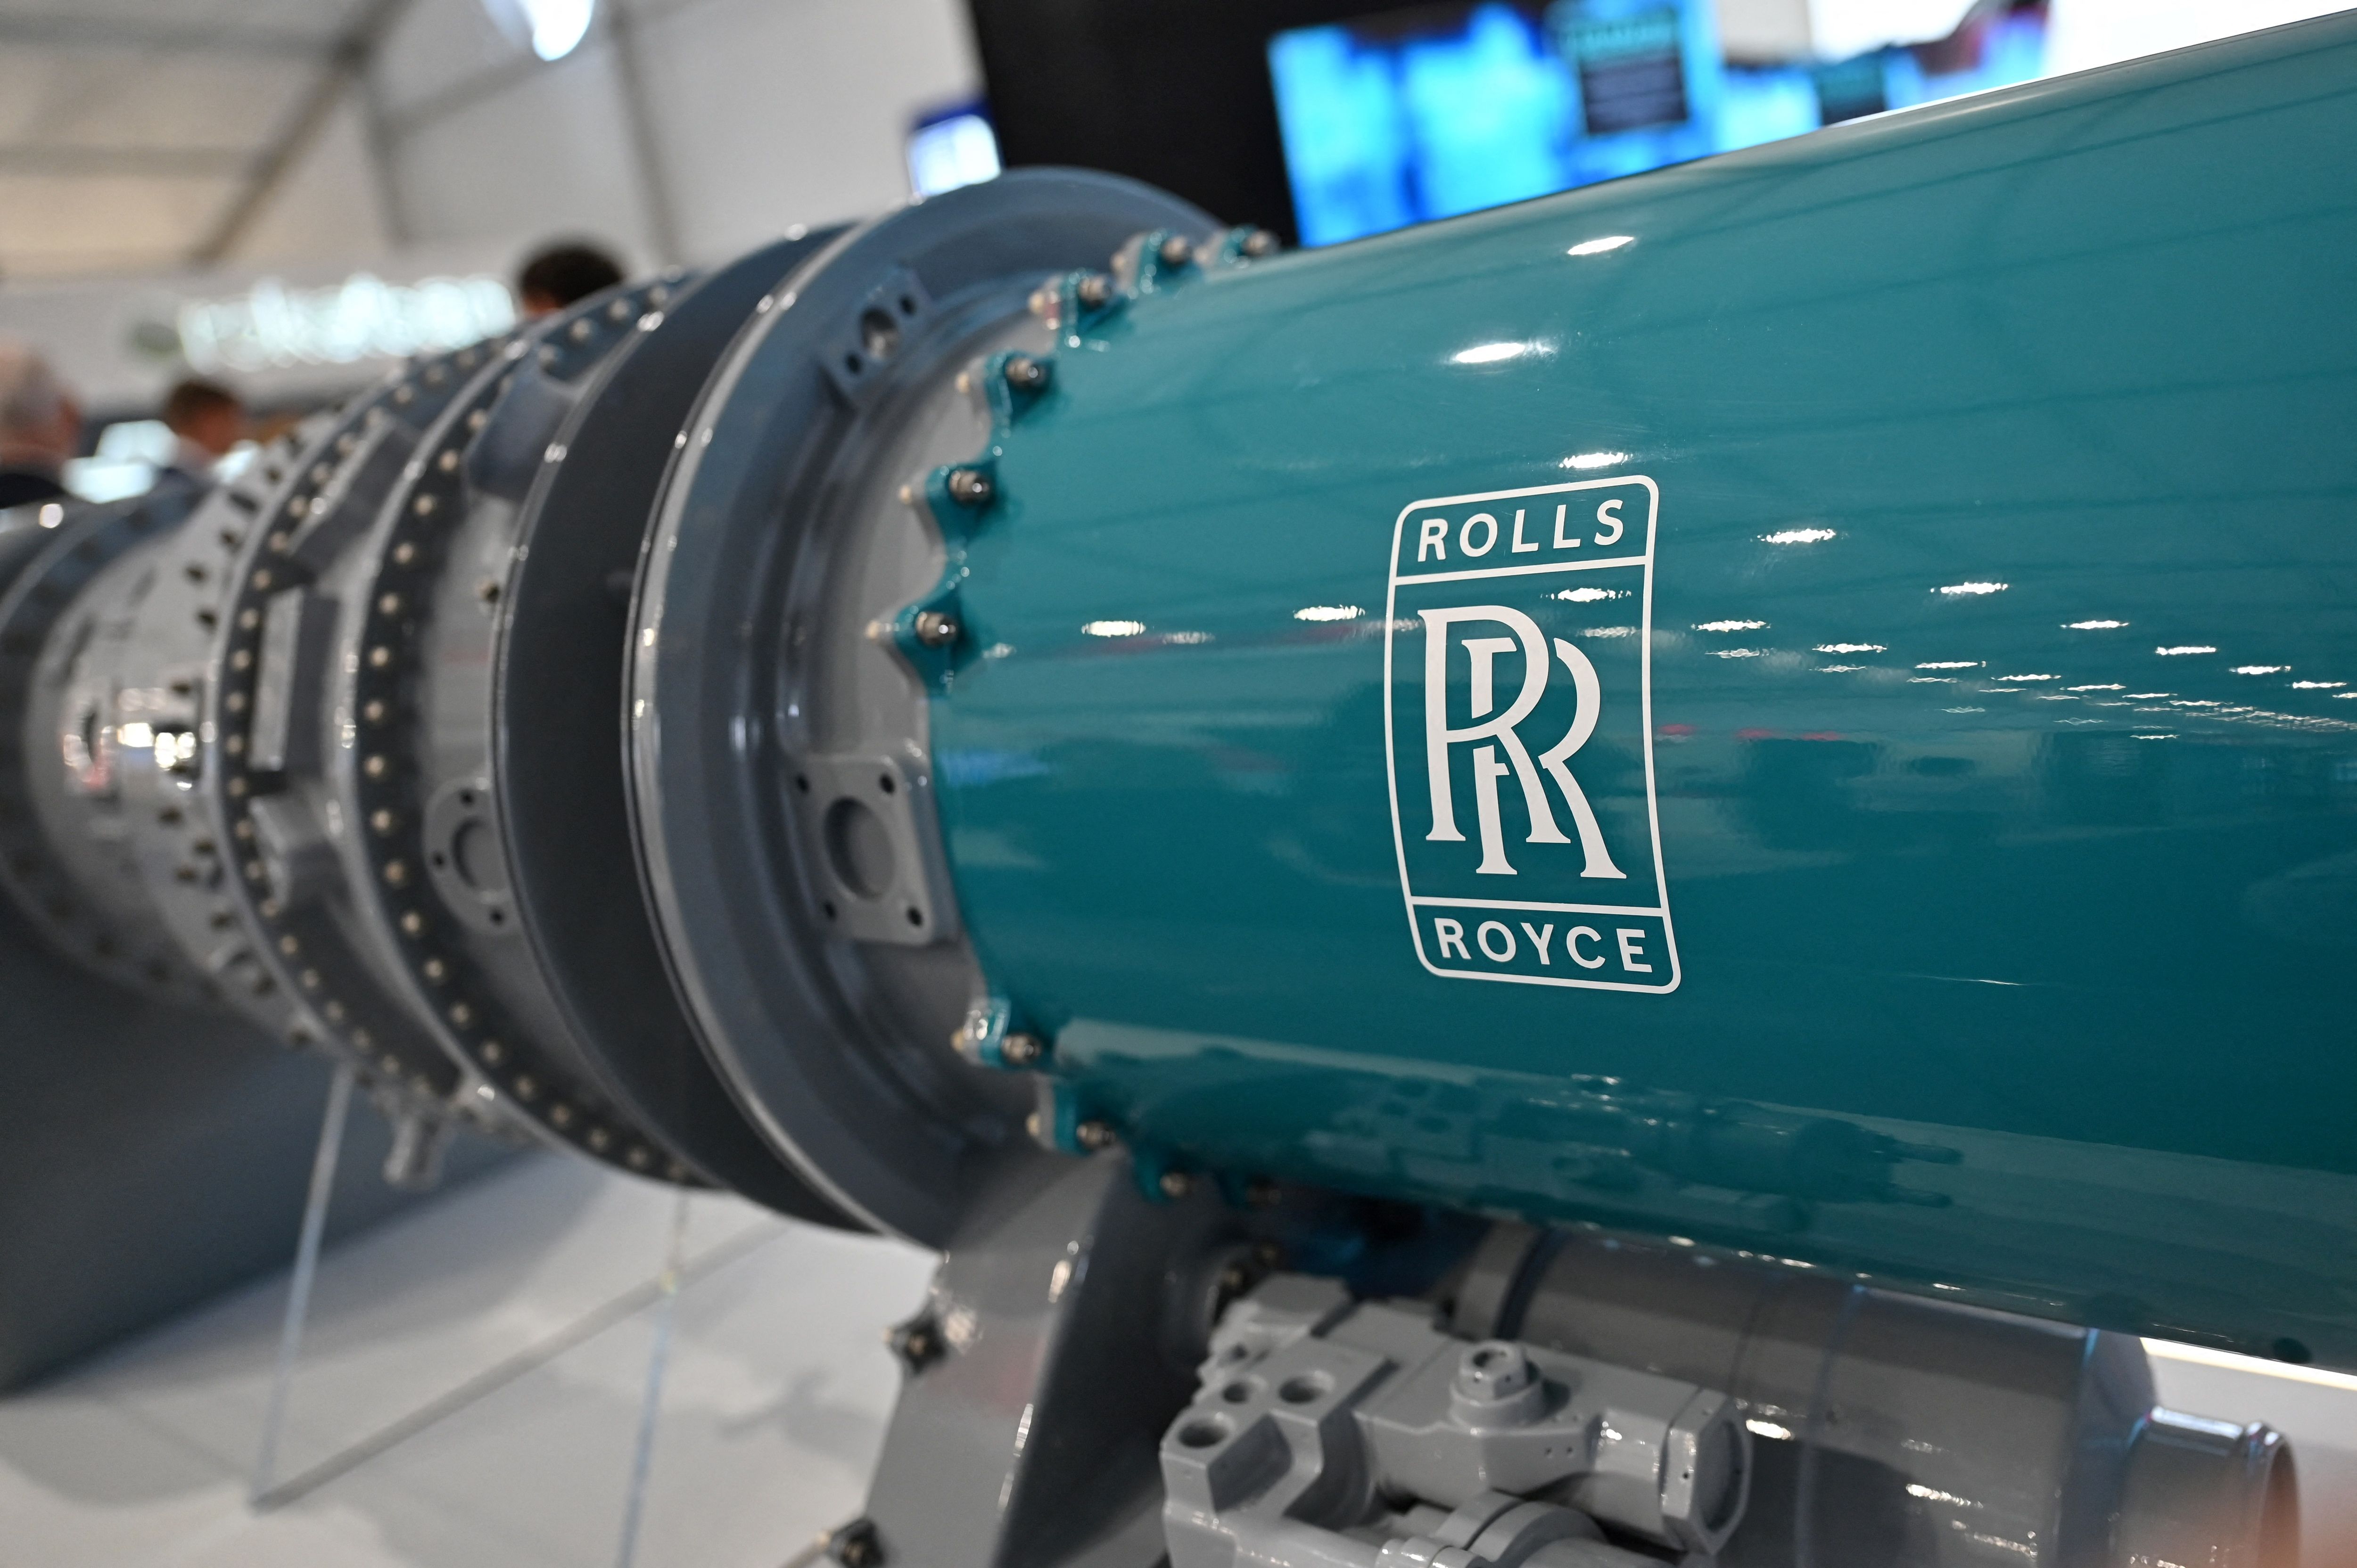 A Rolls-Royce engine seen during an airshow. 